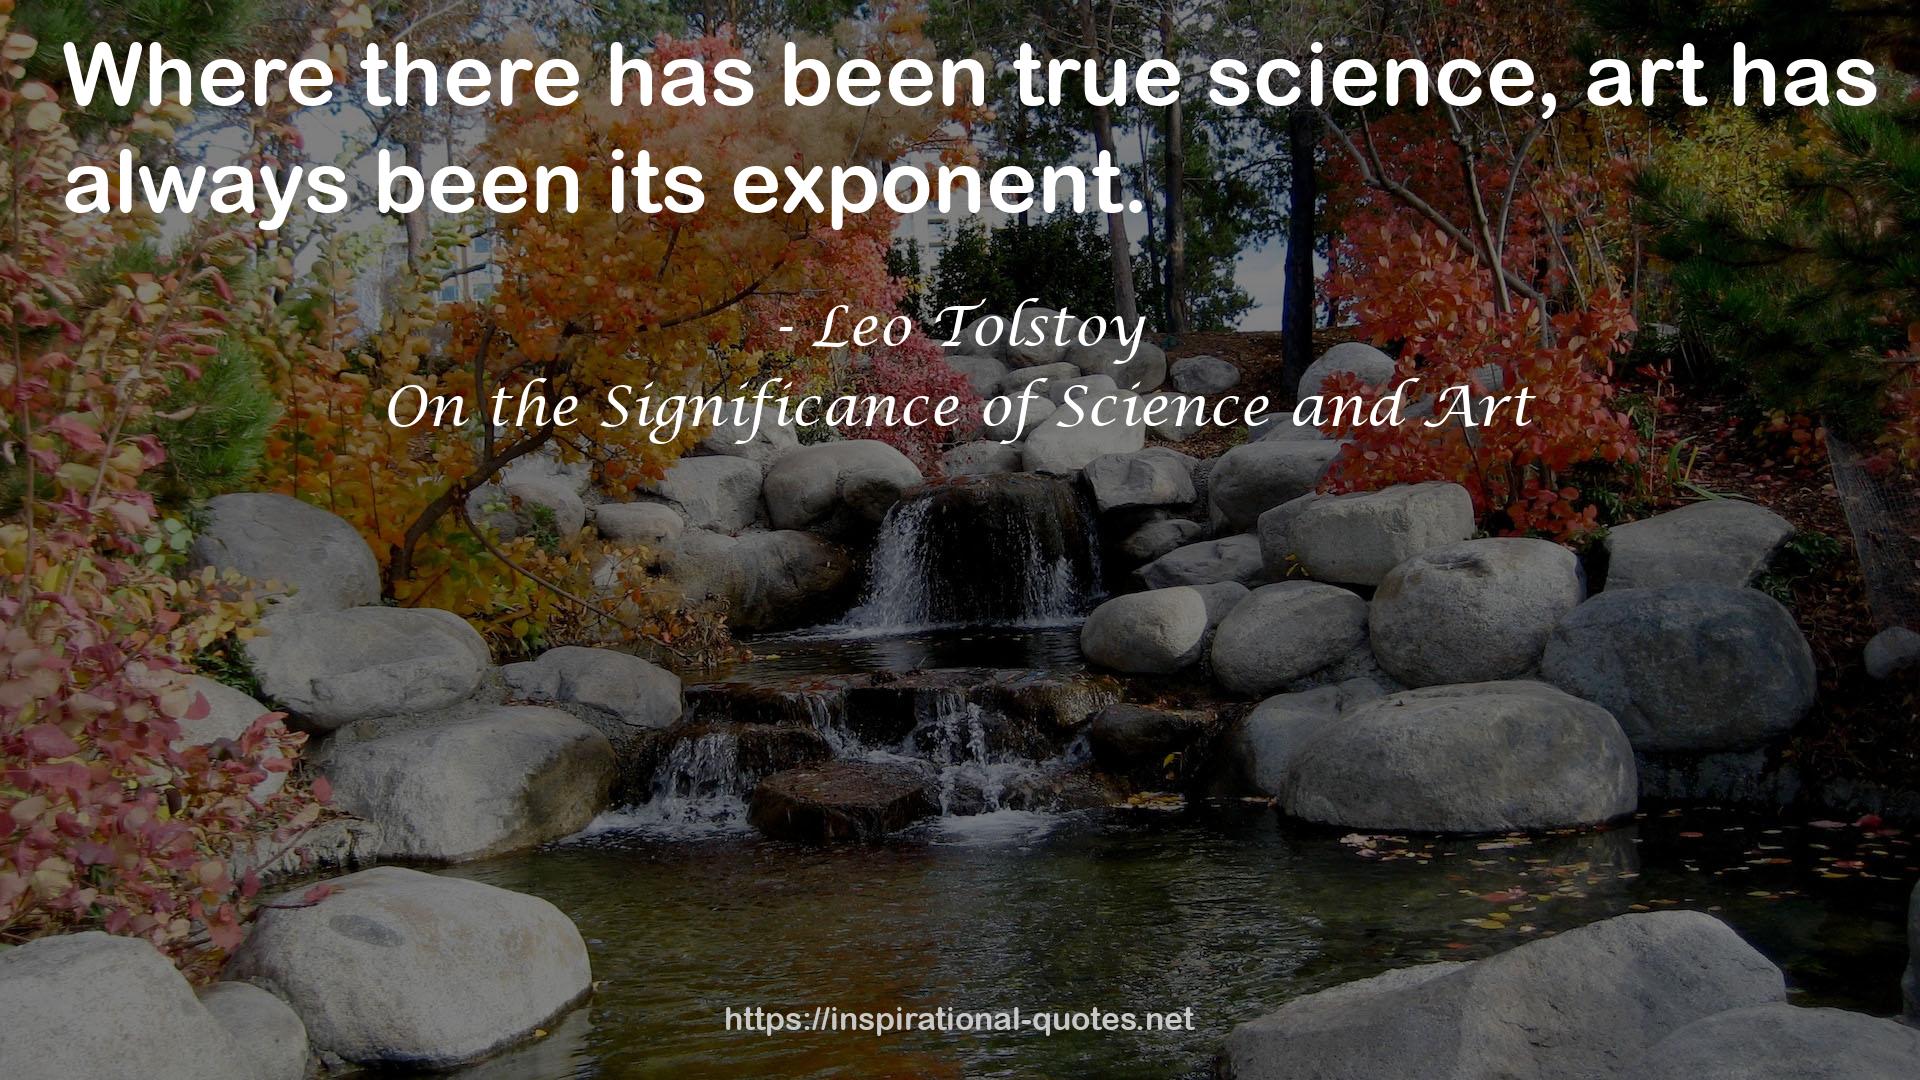 On the Significance of Science and Art QUOTES